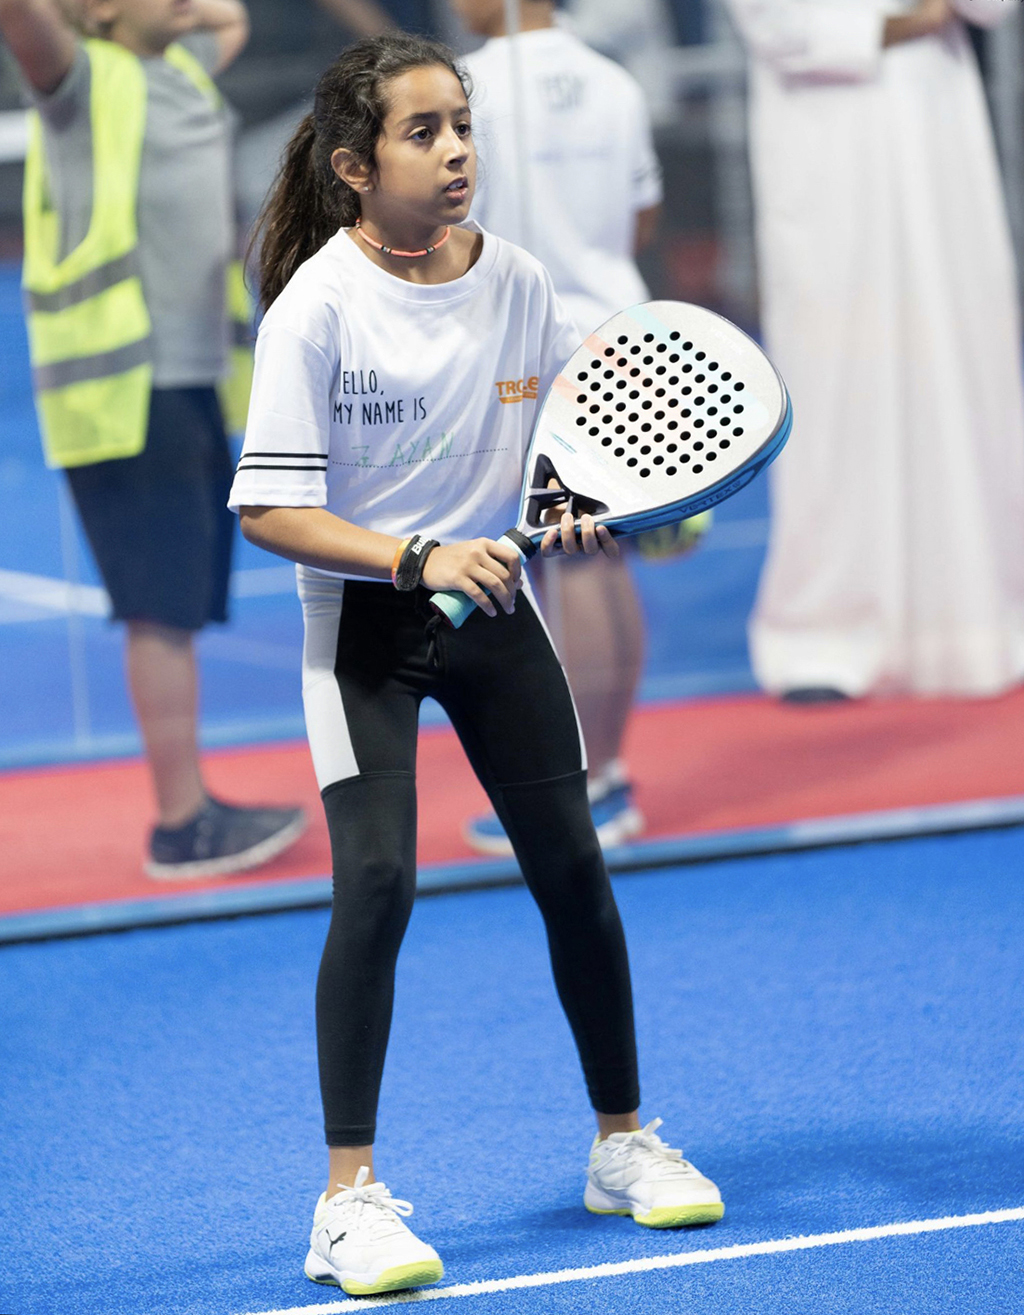 Padel now grabbing attention  of Kuwait kids too